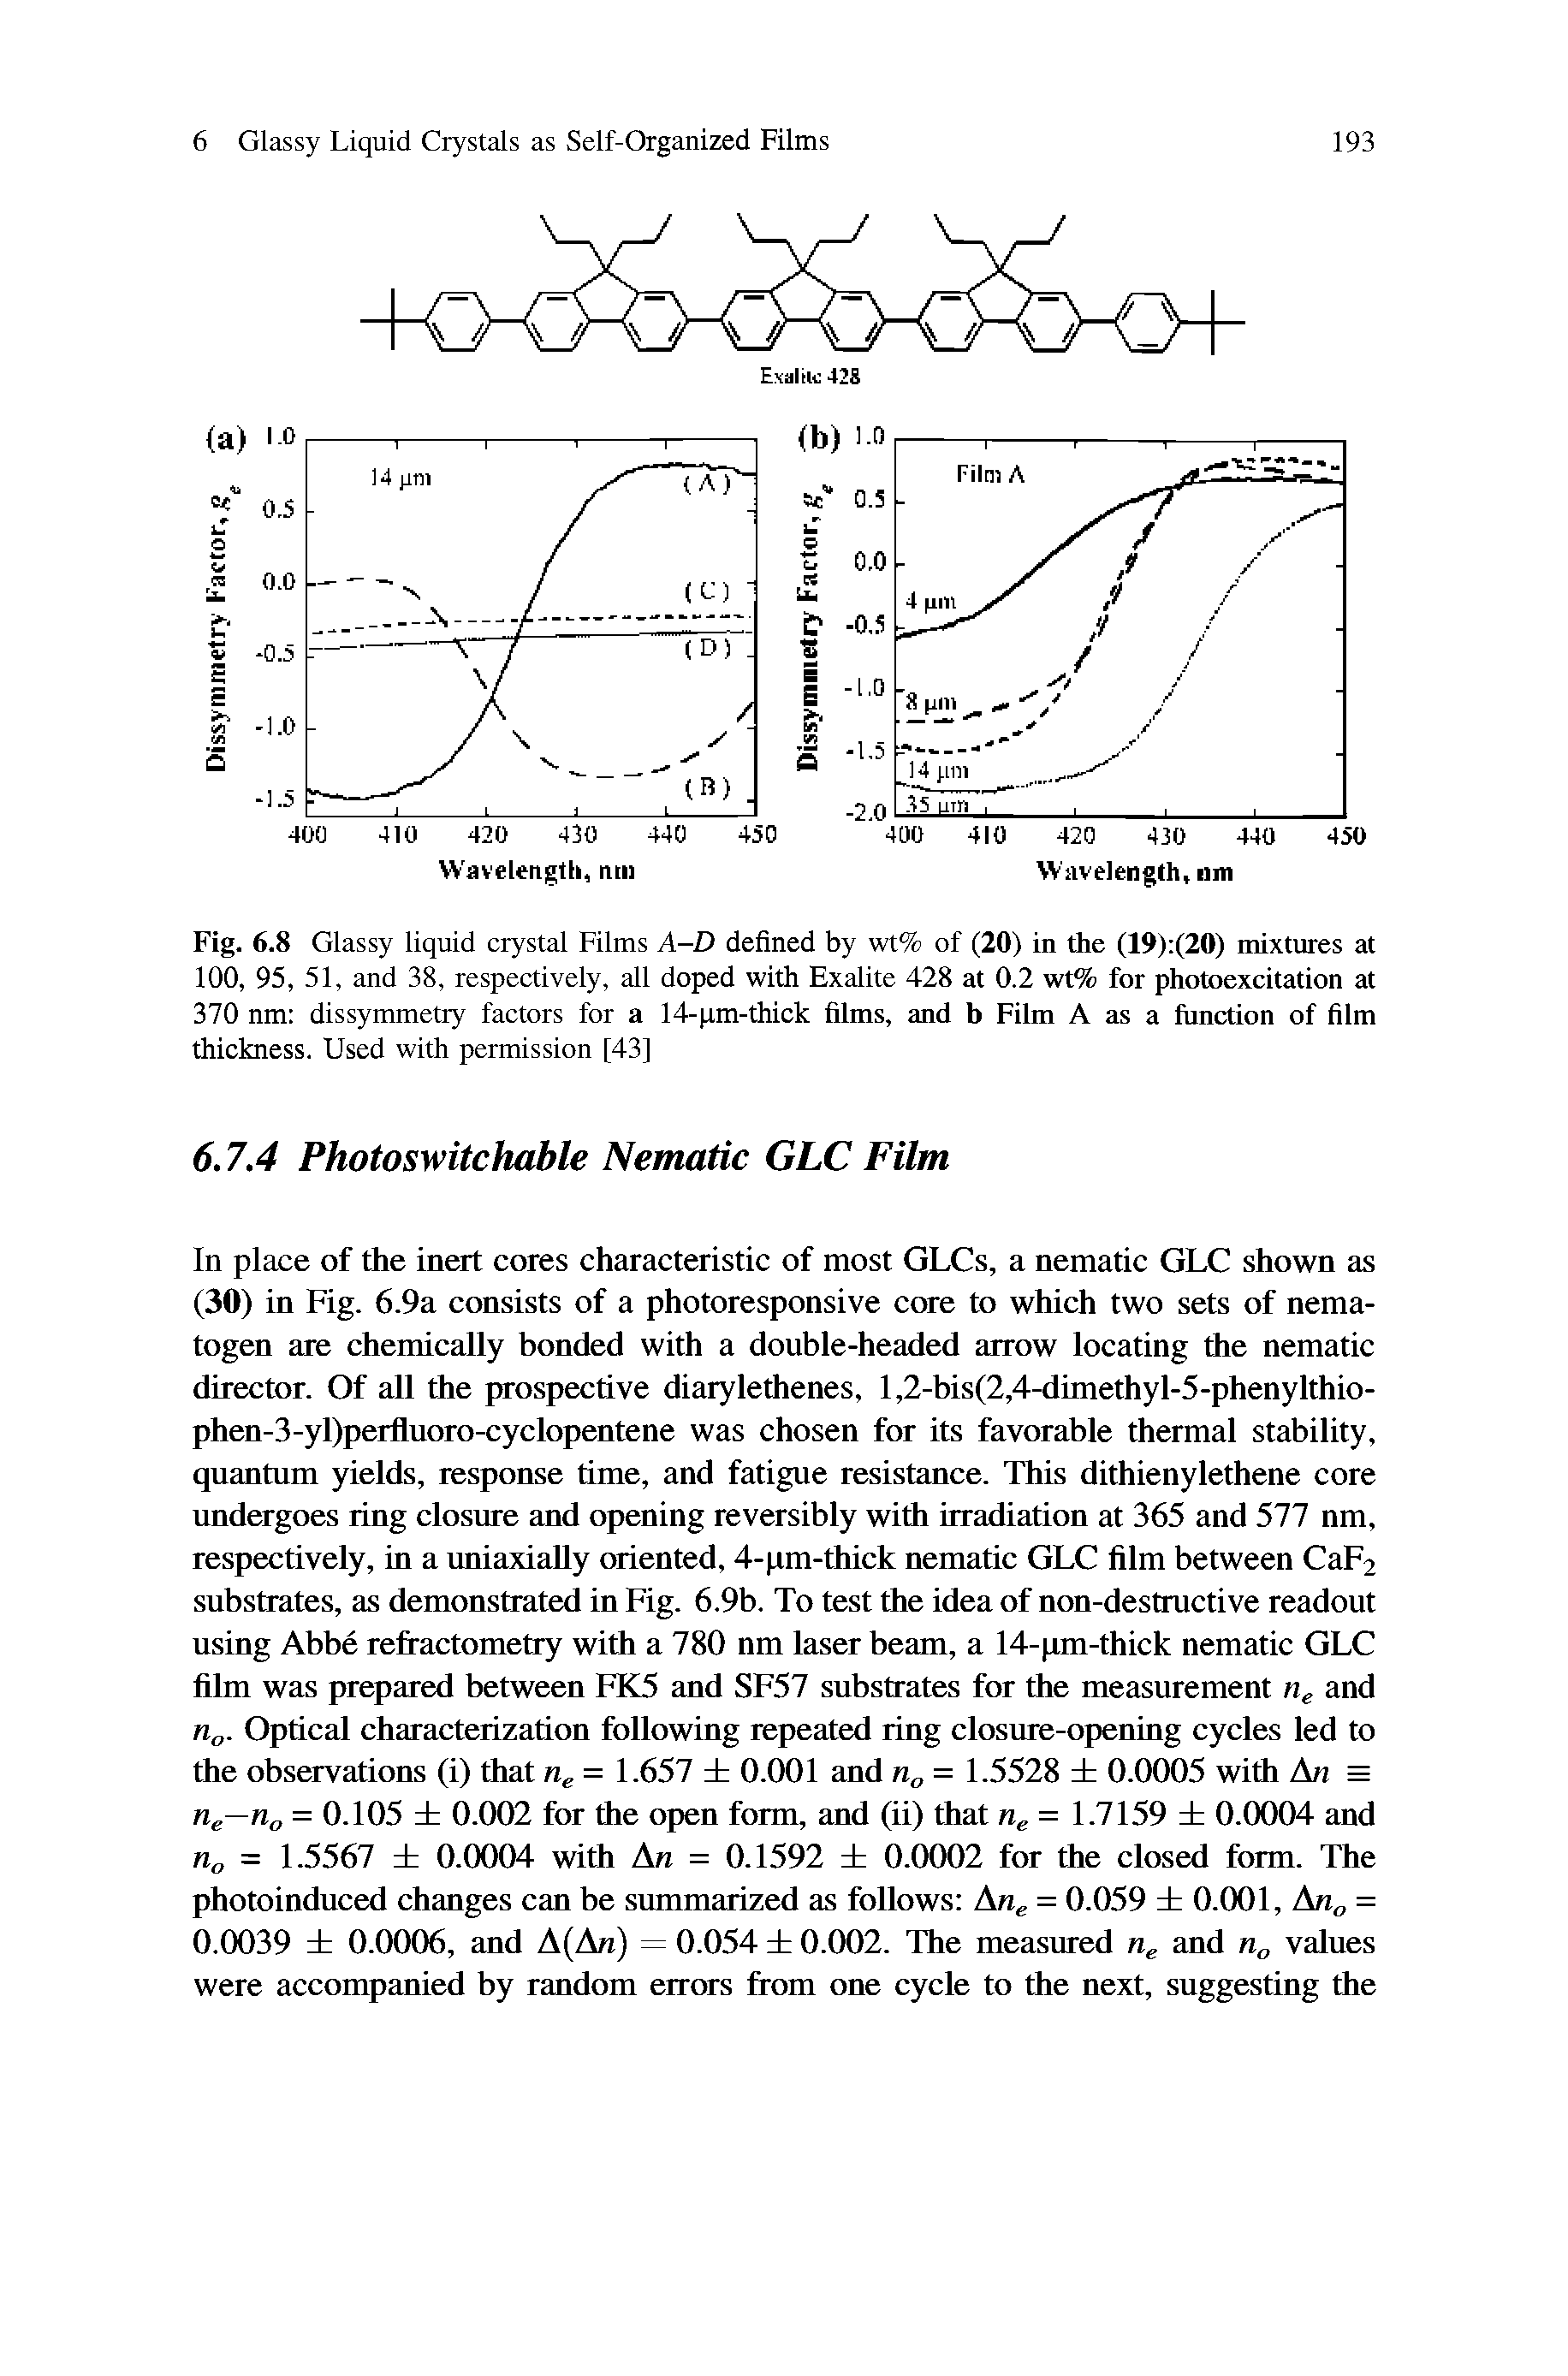 Fig. 6.8 Glassy liquid crystal Films A-D defined by wt% of (20) in the (19) (20) mixtures at 100, 95, 51, and 38, respectively, all doped with Exalite 428 at 0.2 wt% for photoexcitation at 370 nm dissymmetry factors for a 14-pm-thick films, and b Film A as a function of film thickness. Used with permission [43]...